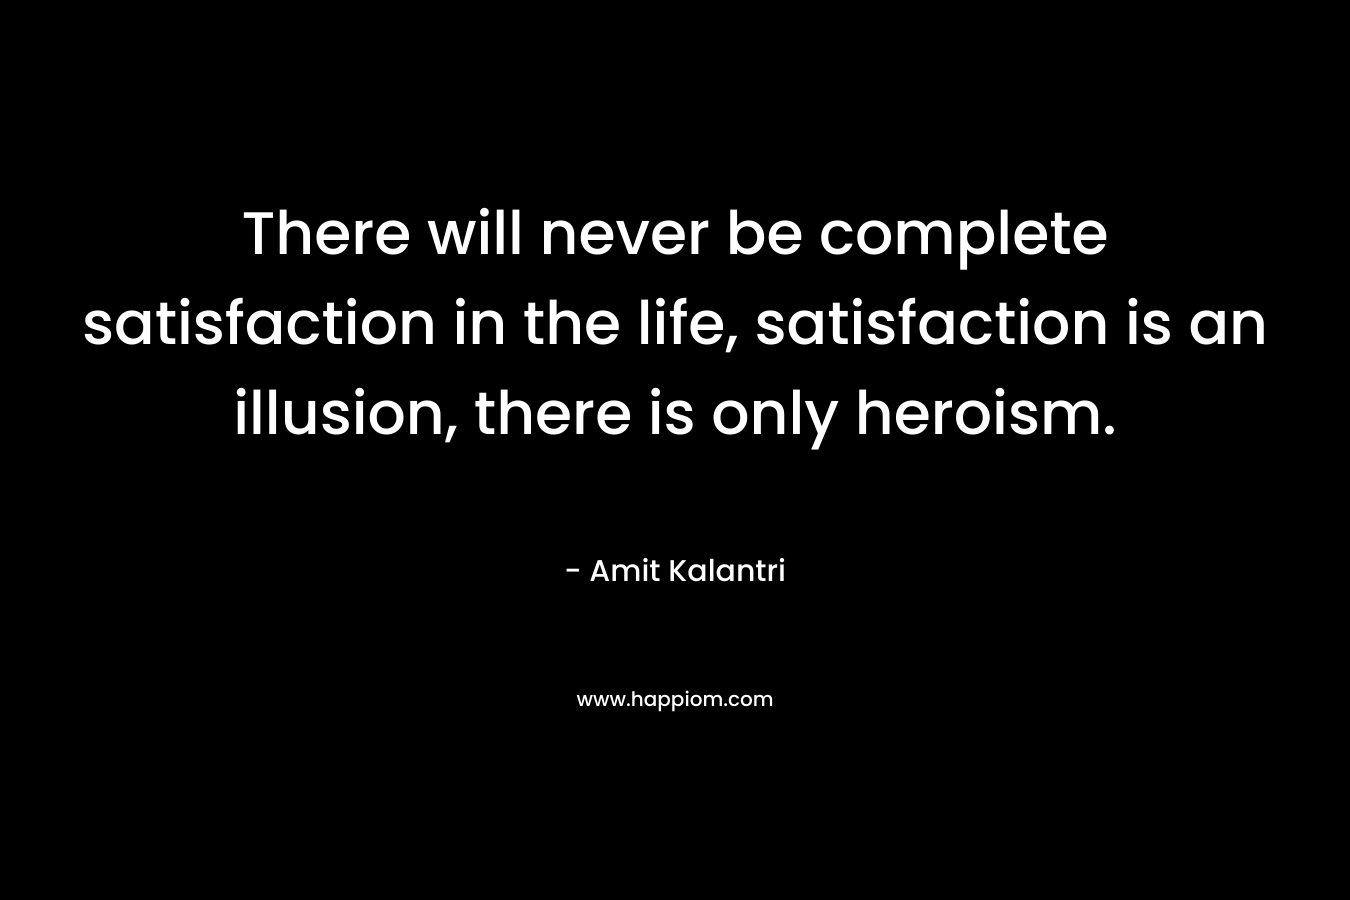 There will never be complete satisfaction in the life, satisfaction is an illusion, there is only heroism.